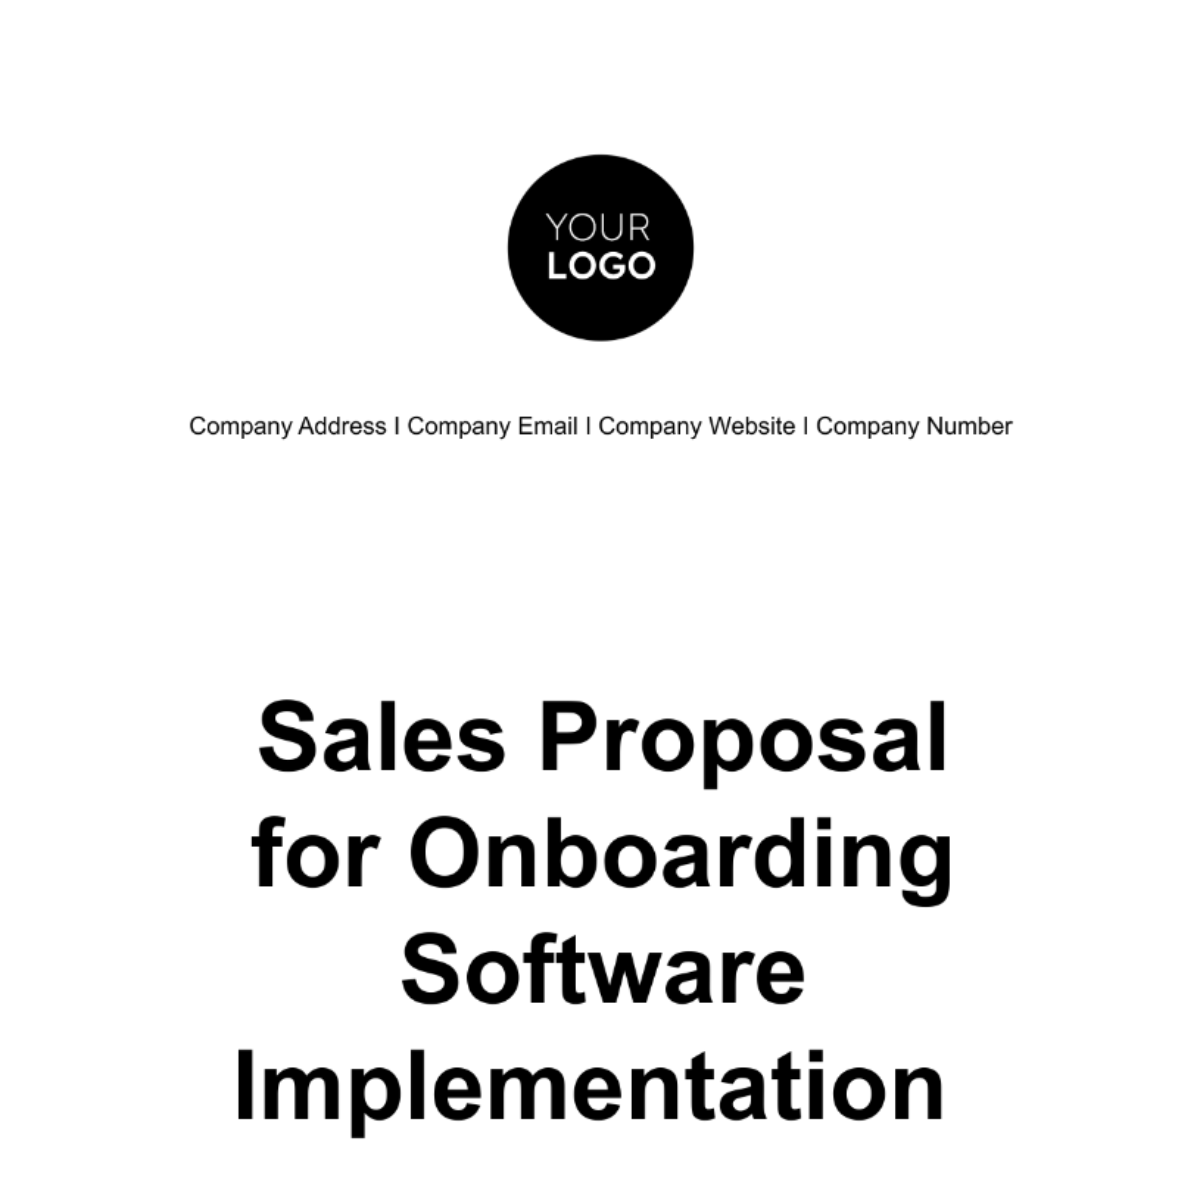 Free Sales Proposal for Onboarding Software Implementation Template